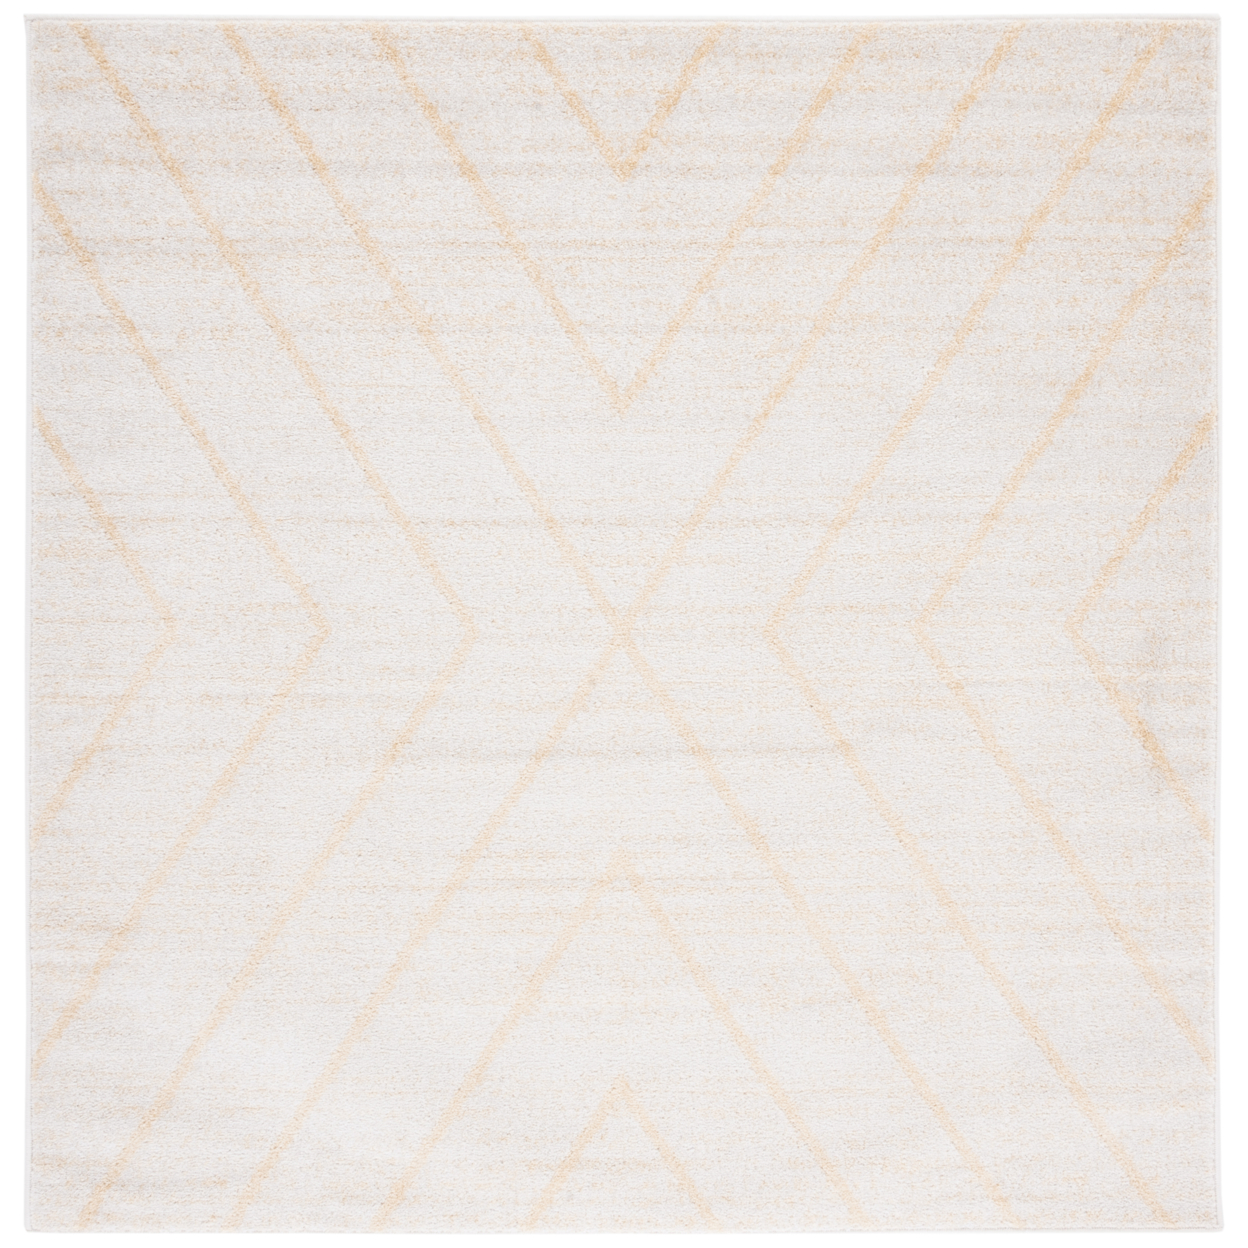 SAFAVIEH Adirondack Collection ADR251D Ivory / Gold Rug - 6' Square